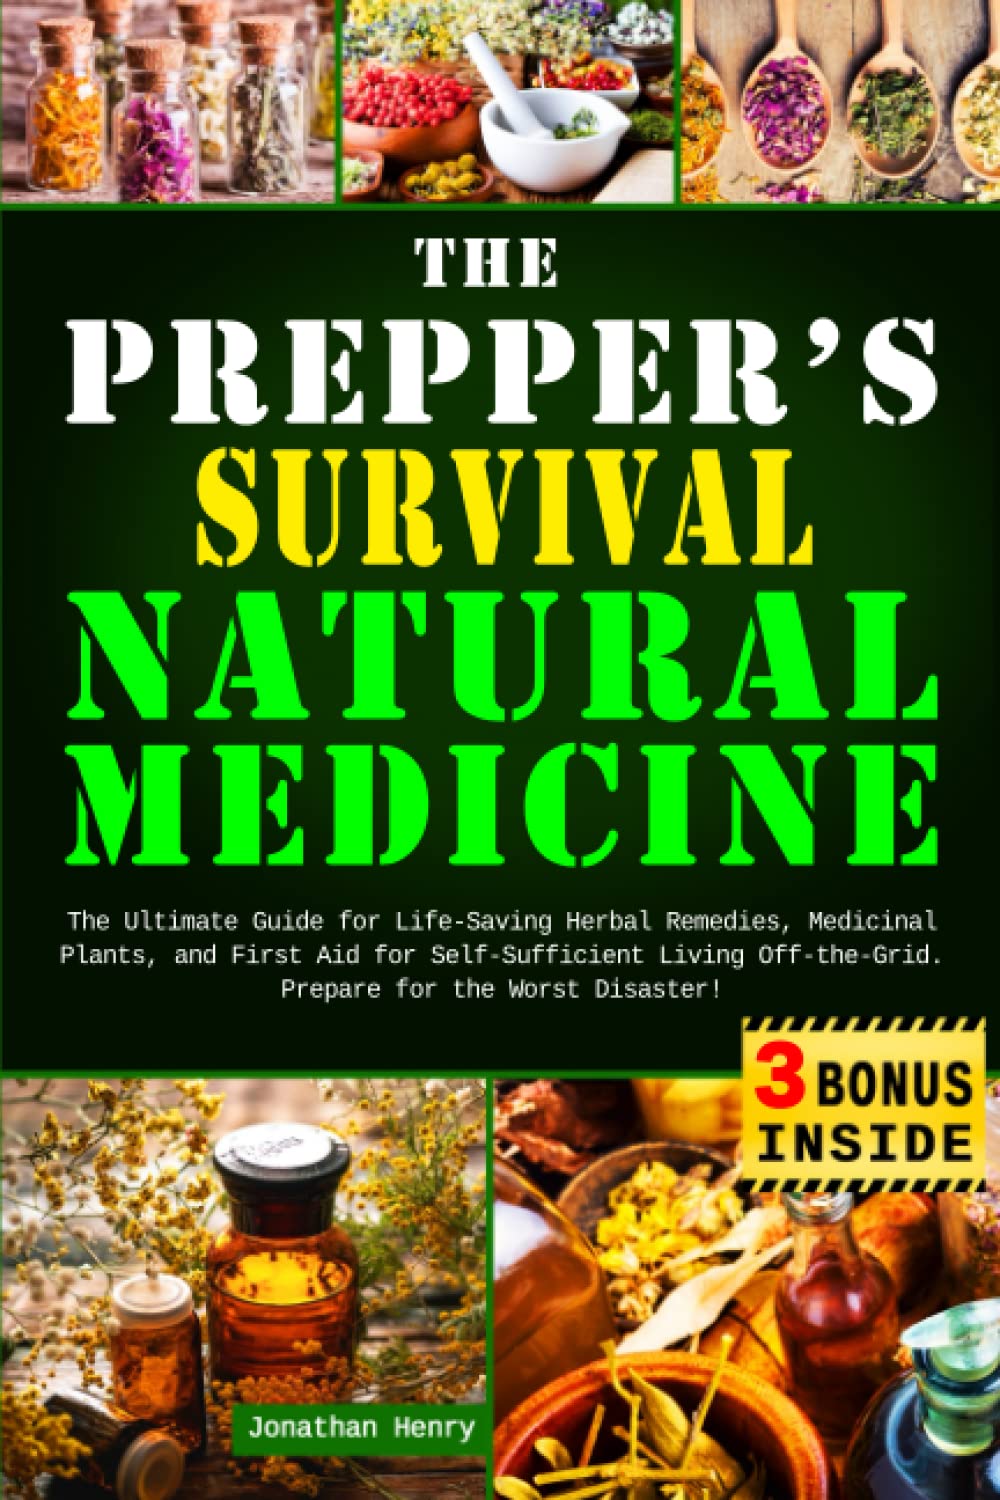 The Prepper’s Survival Natural Medicine: The Ultimate Guide for Life-Saving Herbal Remedies, Medicinal Plants, and First Aid for Self-Sufficient Living Off-the-Grid. Prepare for the Worst Disaster!